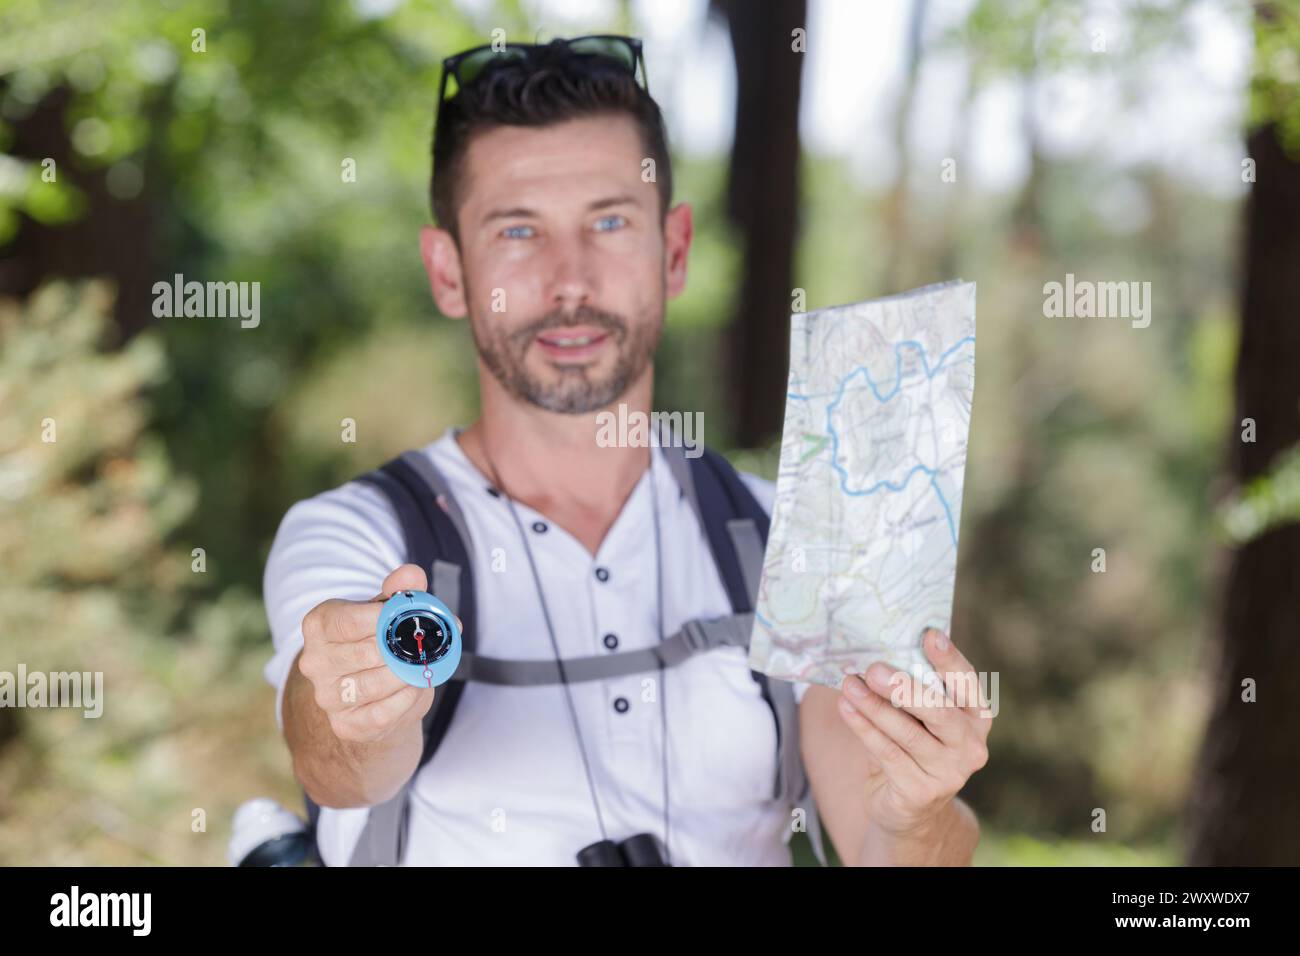 traveler holding a compass and map Stock Photo